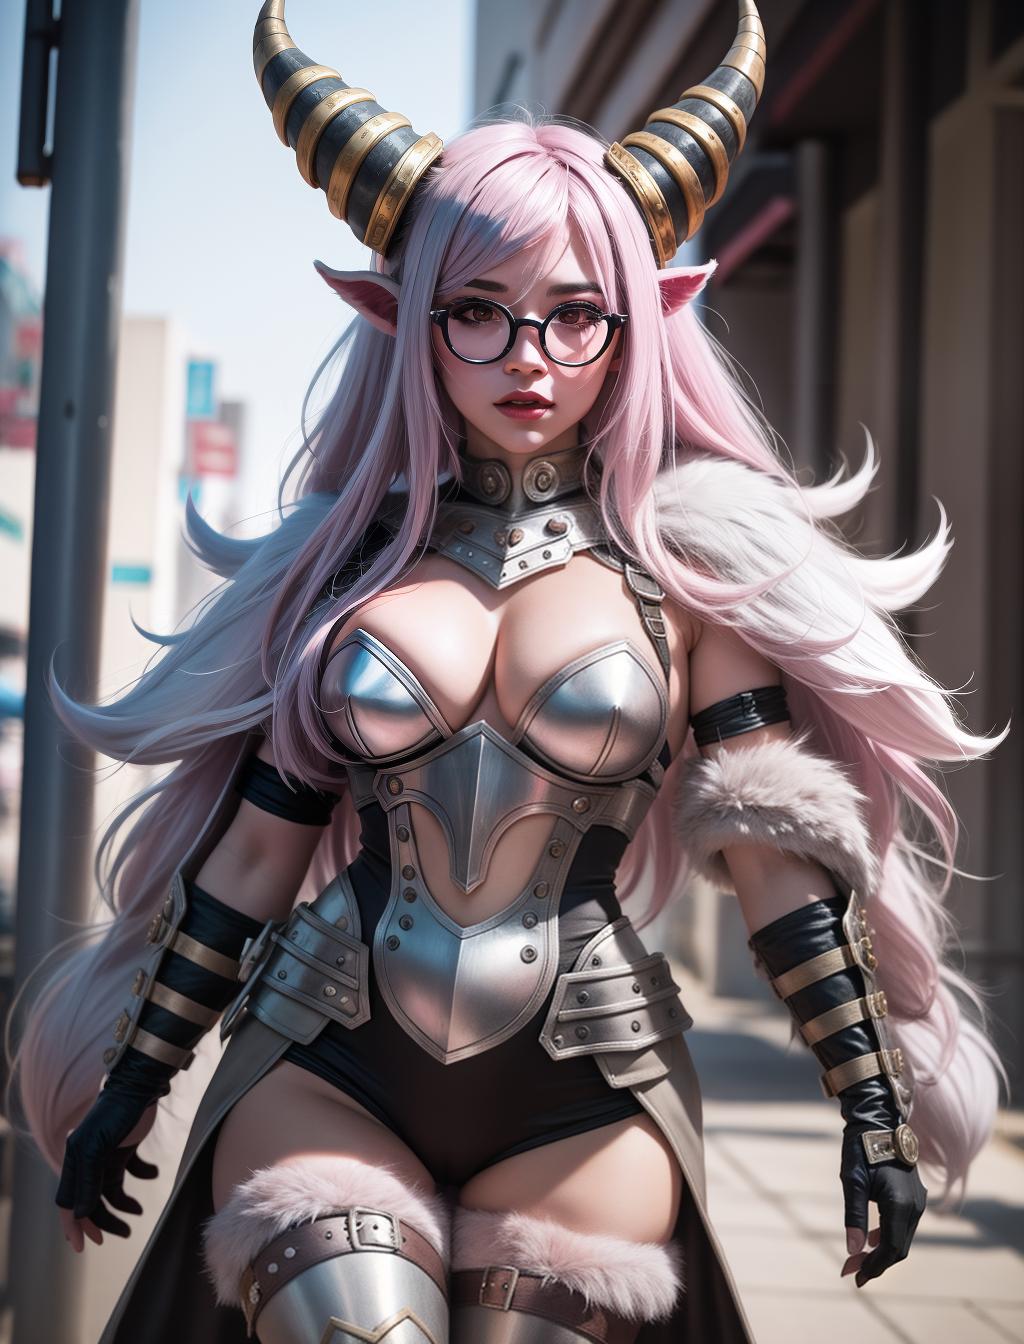  Goatwoman with medium sized horns in pastel grey pink hair and glasses 2D defined body with hooves furry skin wearing a Gladiator outfit hyper realistic expressionism hyperdetailed 38k cellular atomic neural network hyperbolic structure